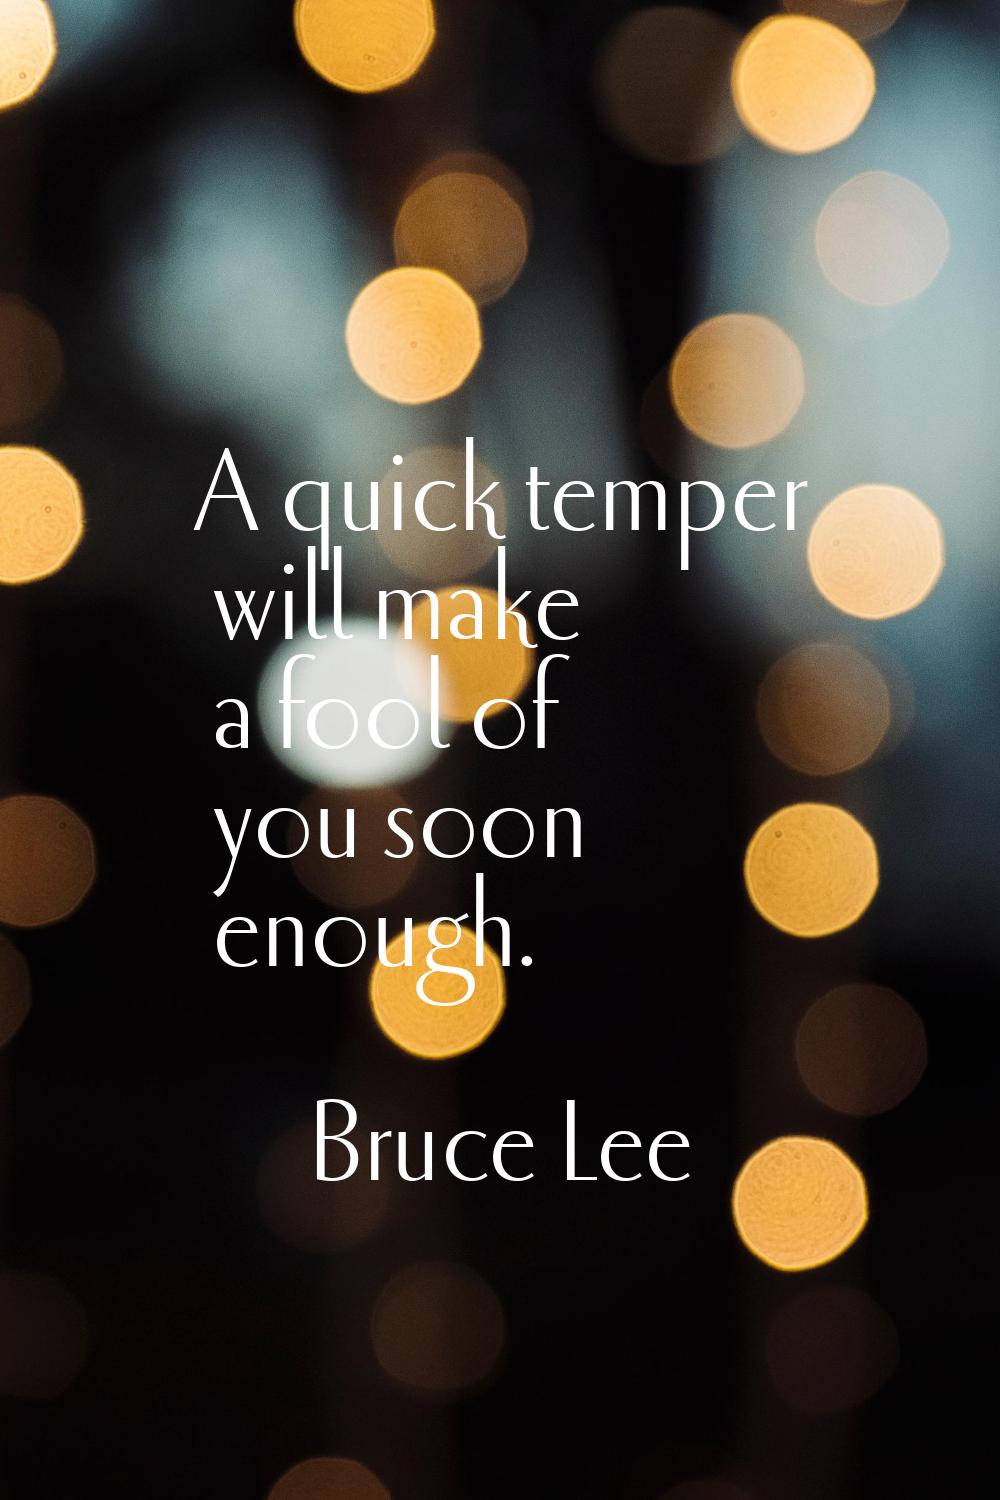 A quick temper will make a fool of you soon enough.